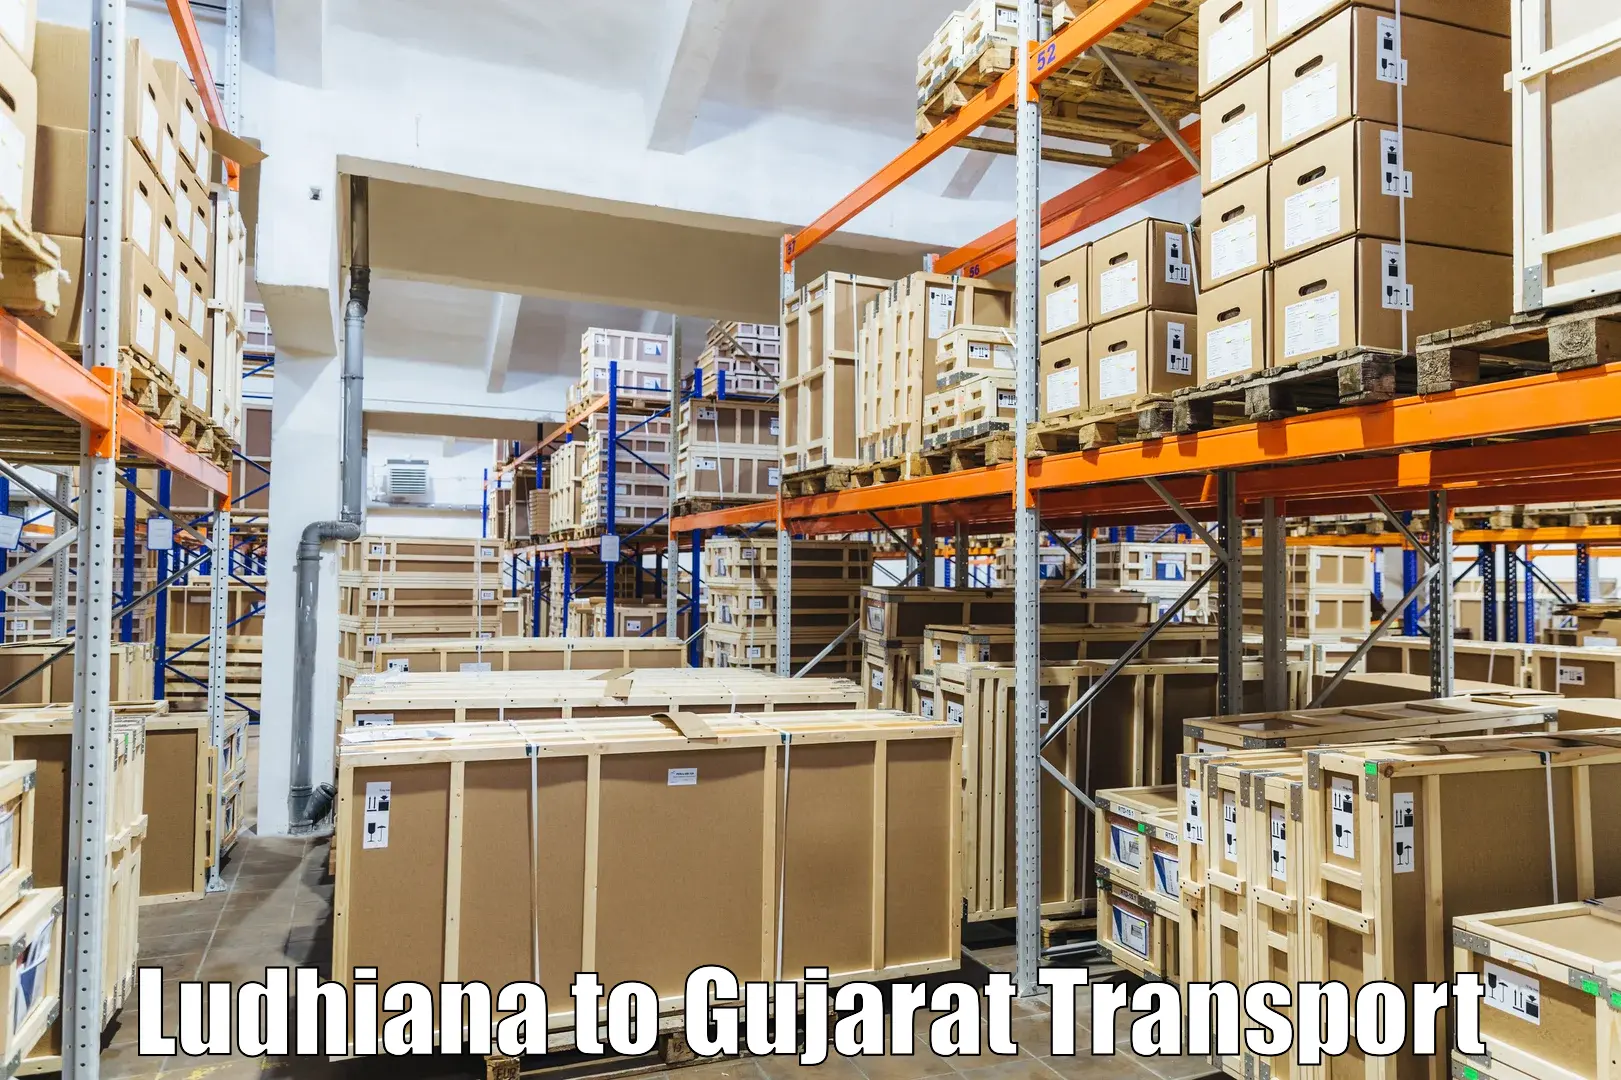 Online transport service Ludhiana to Anand